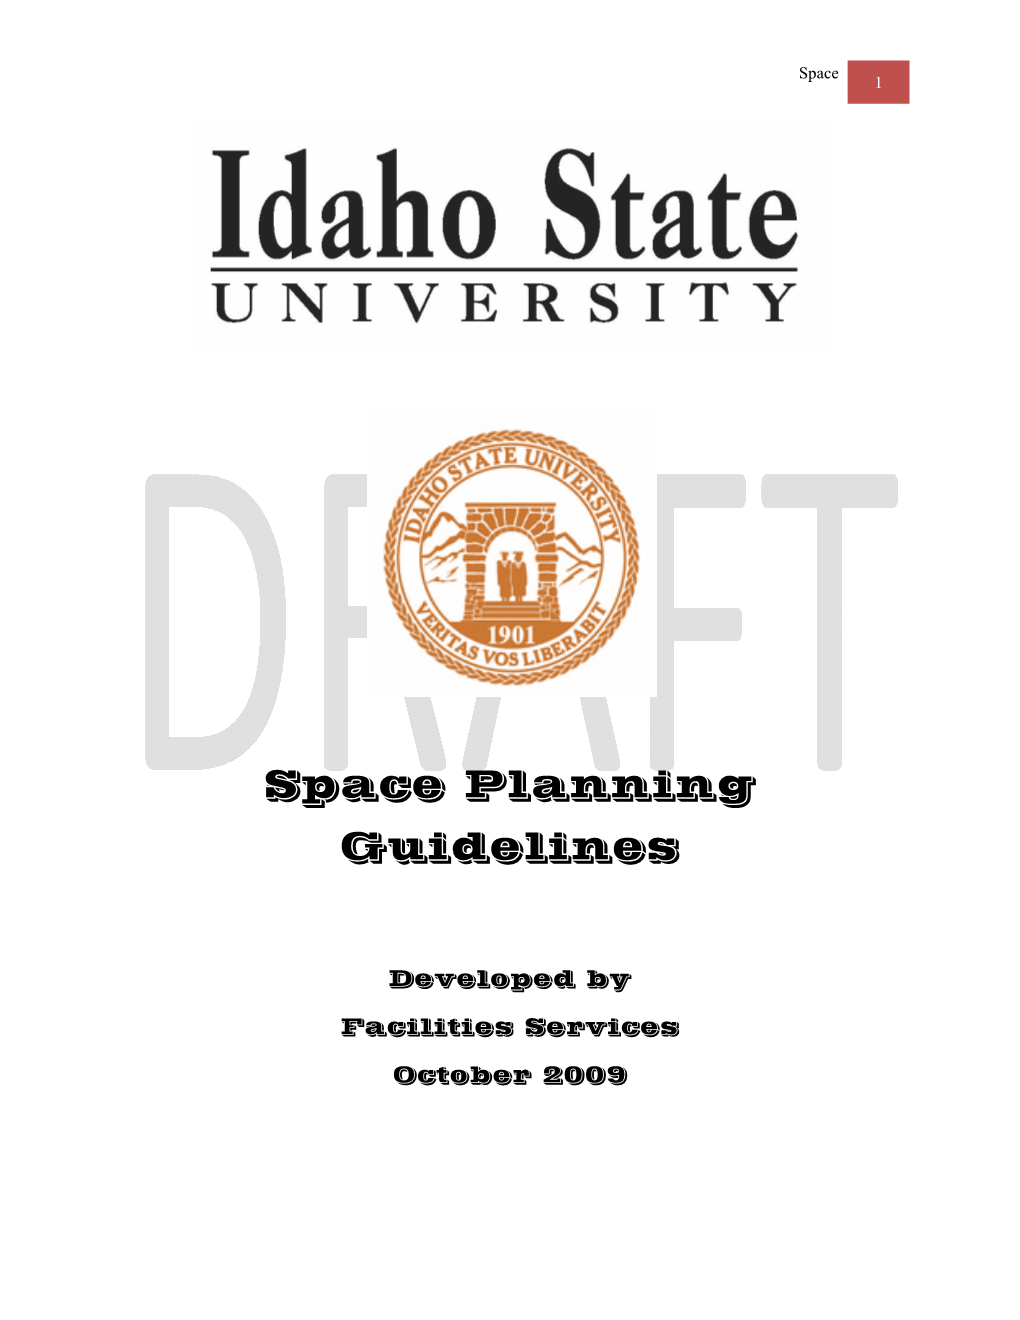 Space Planning Guidelines